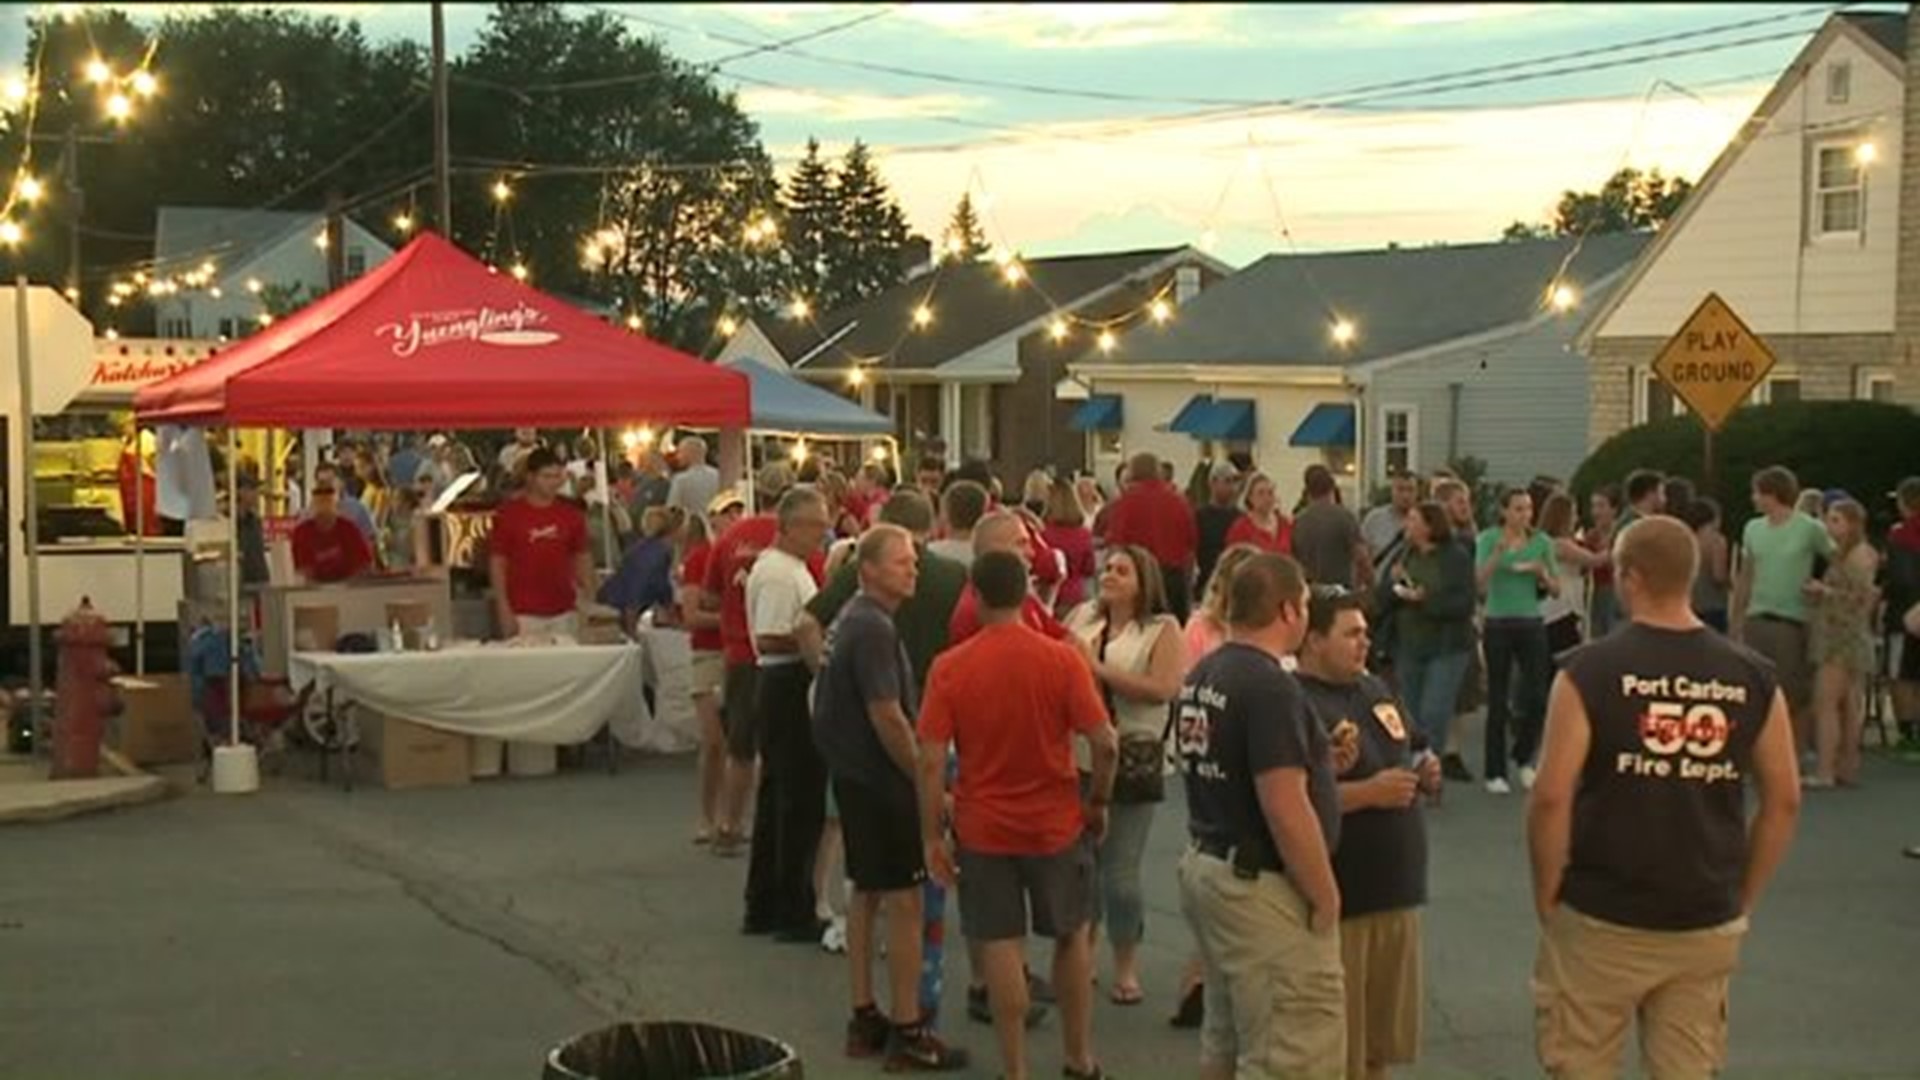 Night of Fun at Annual Block Party